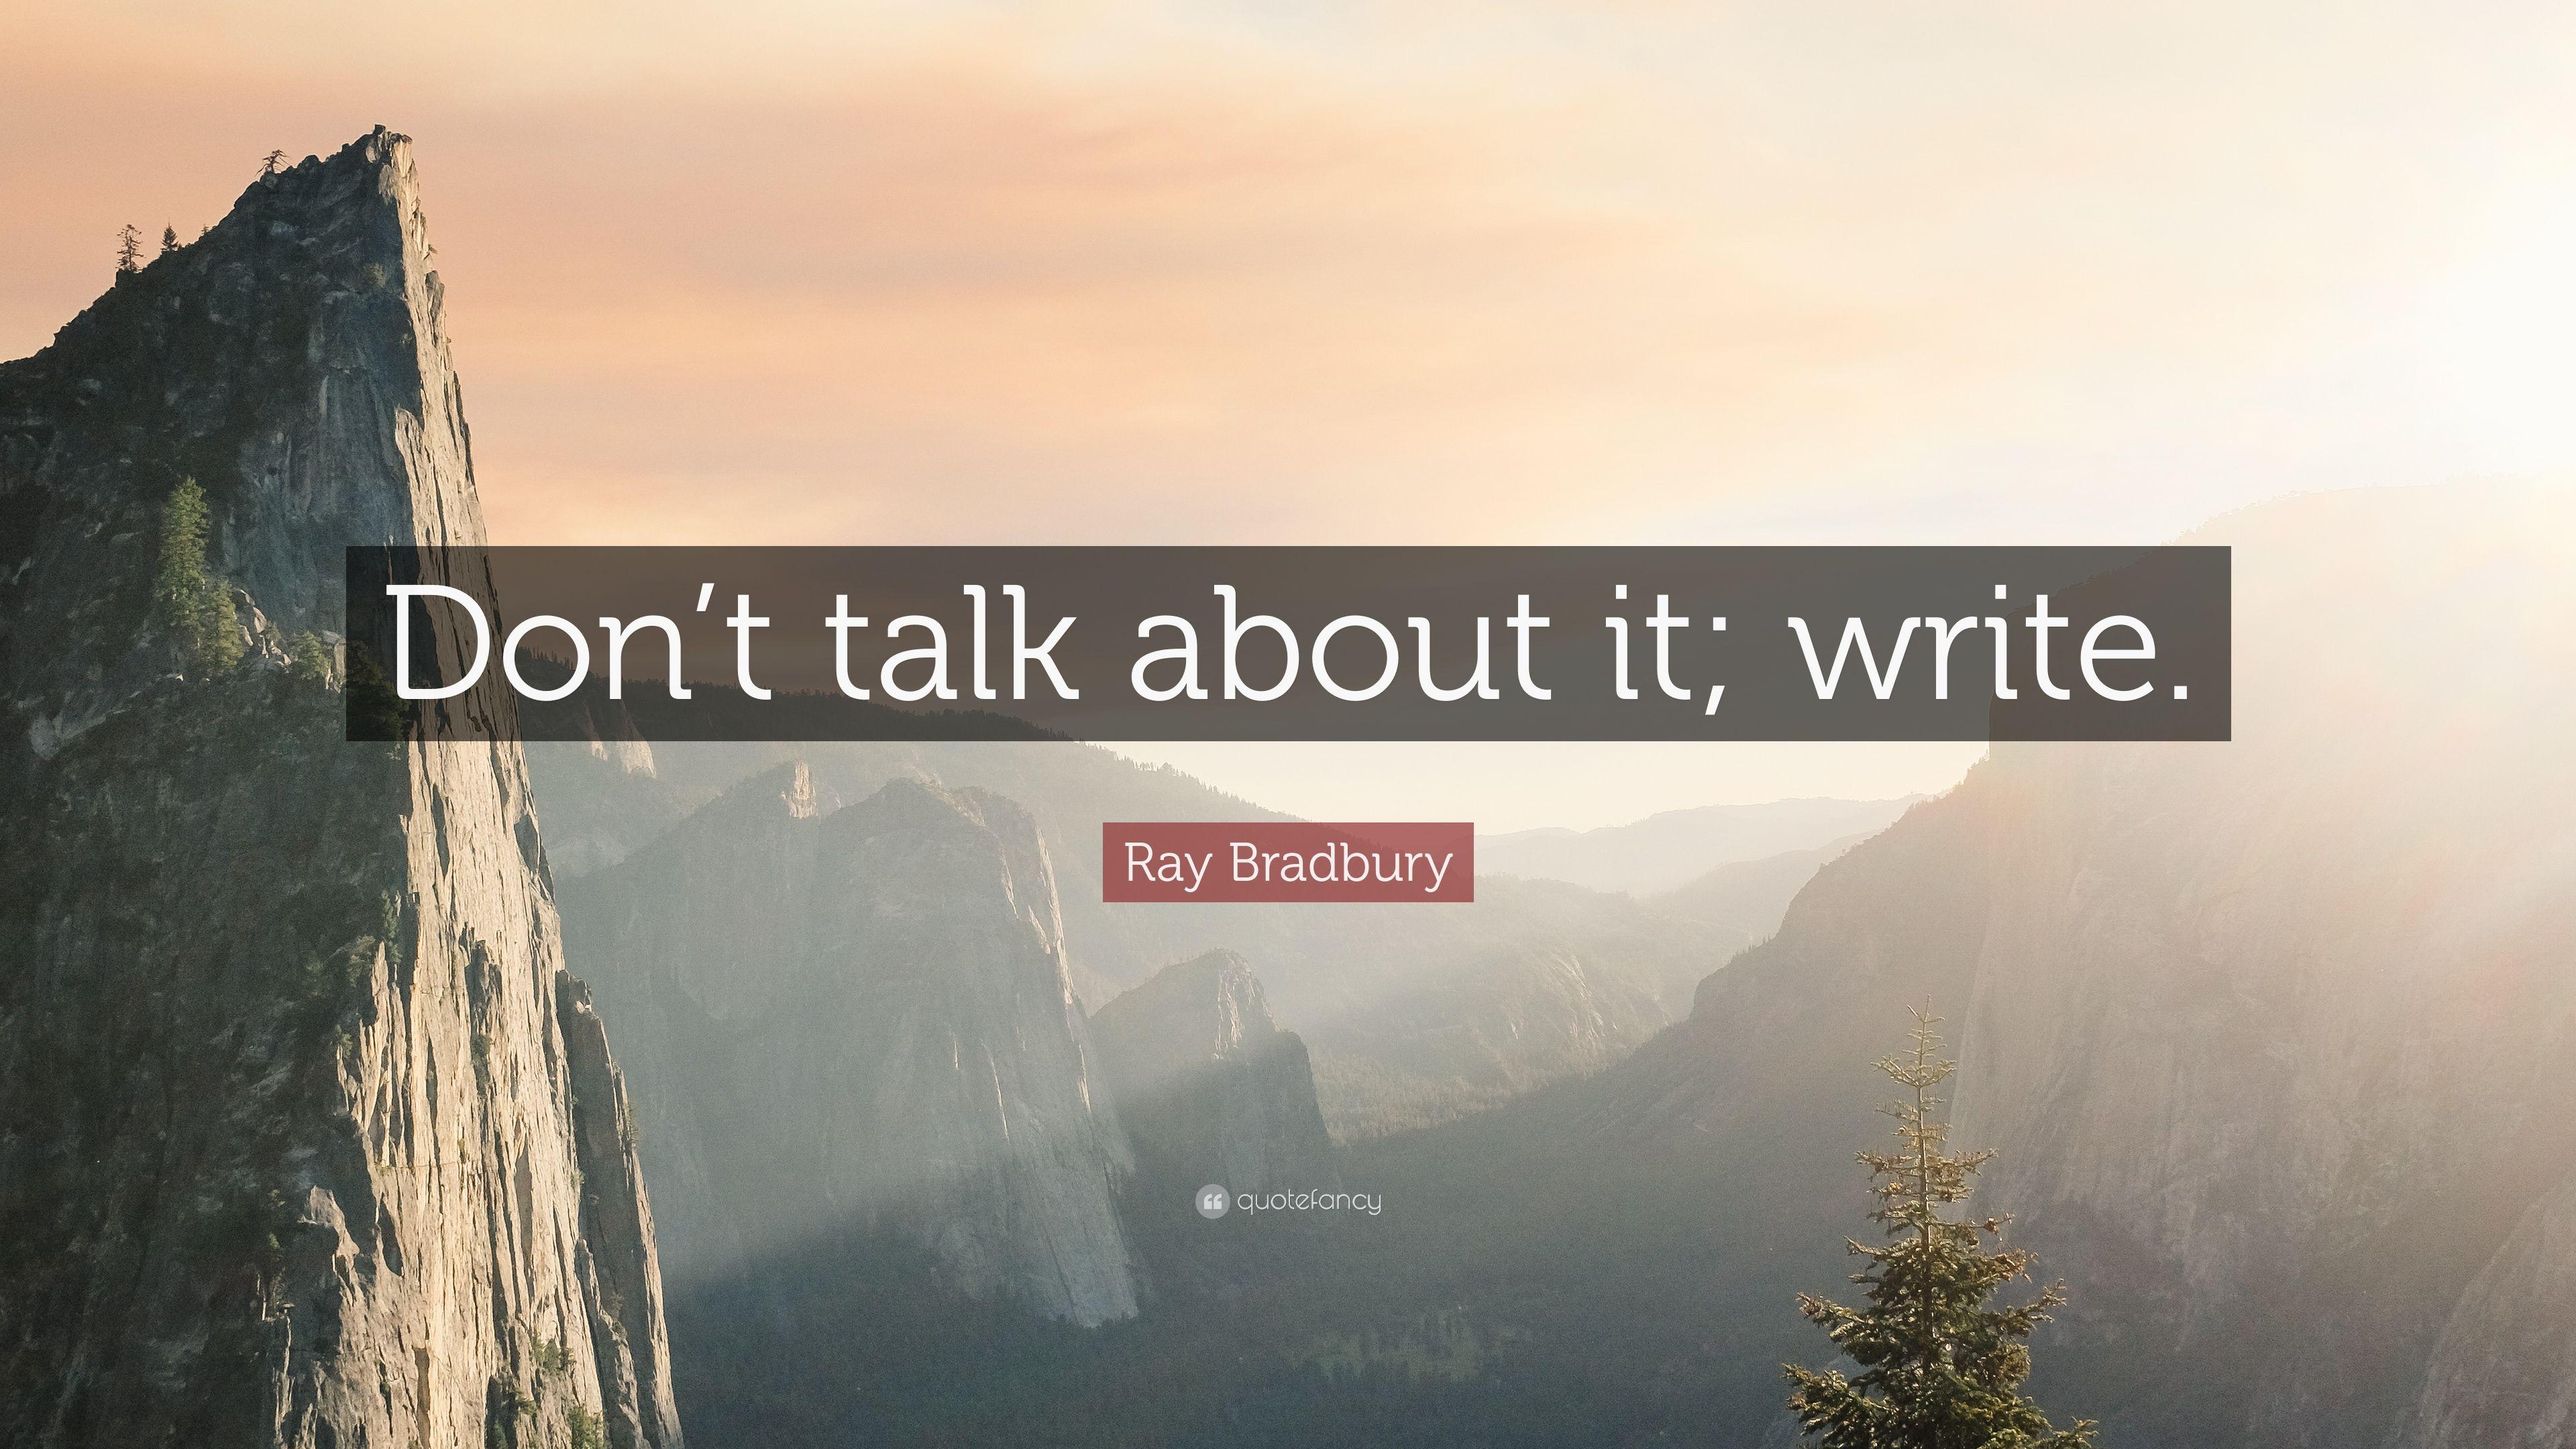 Ray Bradbury Quote: “Don't talk about it; write.” 5 wallpaper